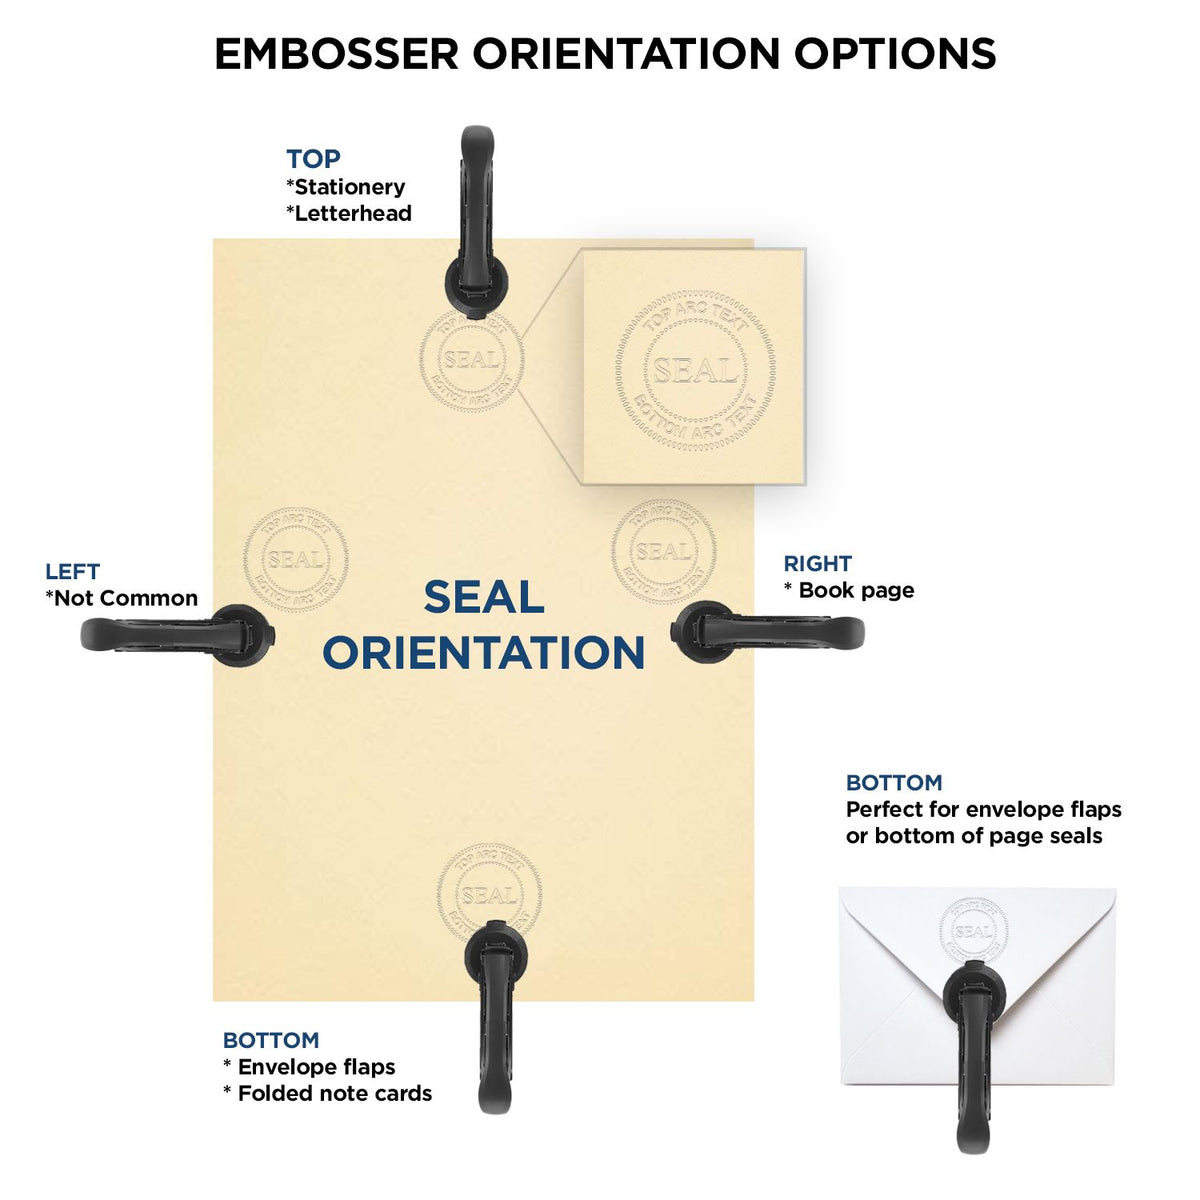 An infographic for the State of Kentucky Architectural Seal Embosser showing embosser orientation, this is showing examples of a top, bottom, right and left insert.